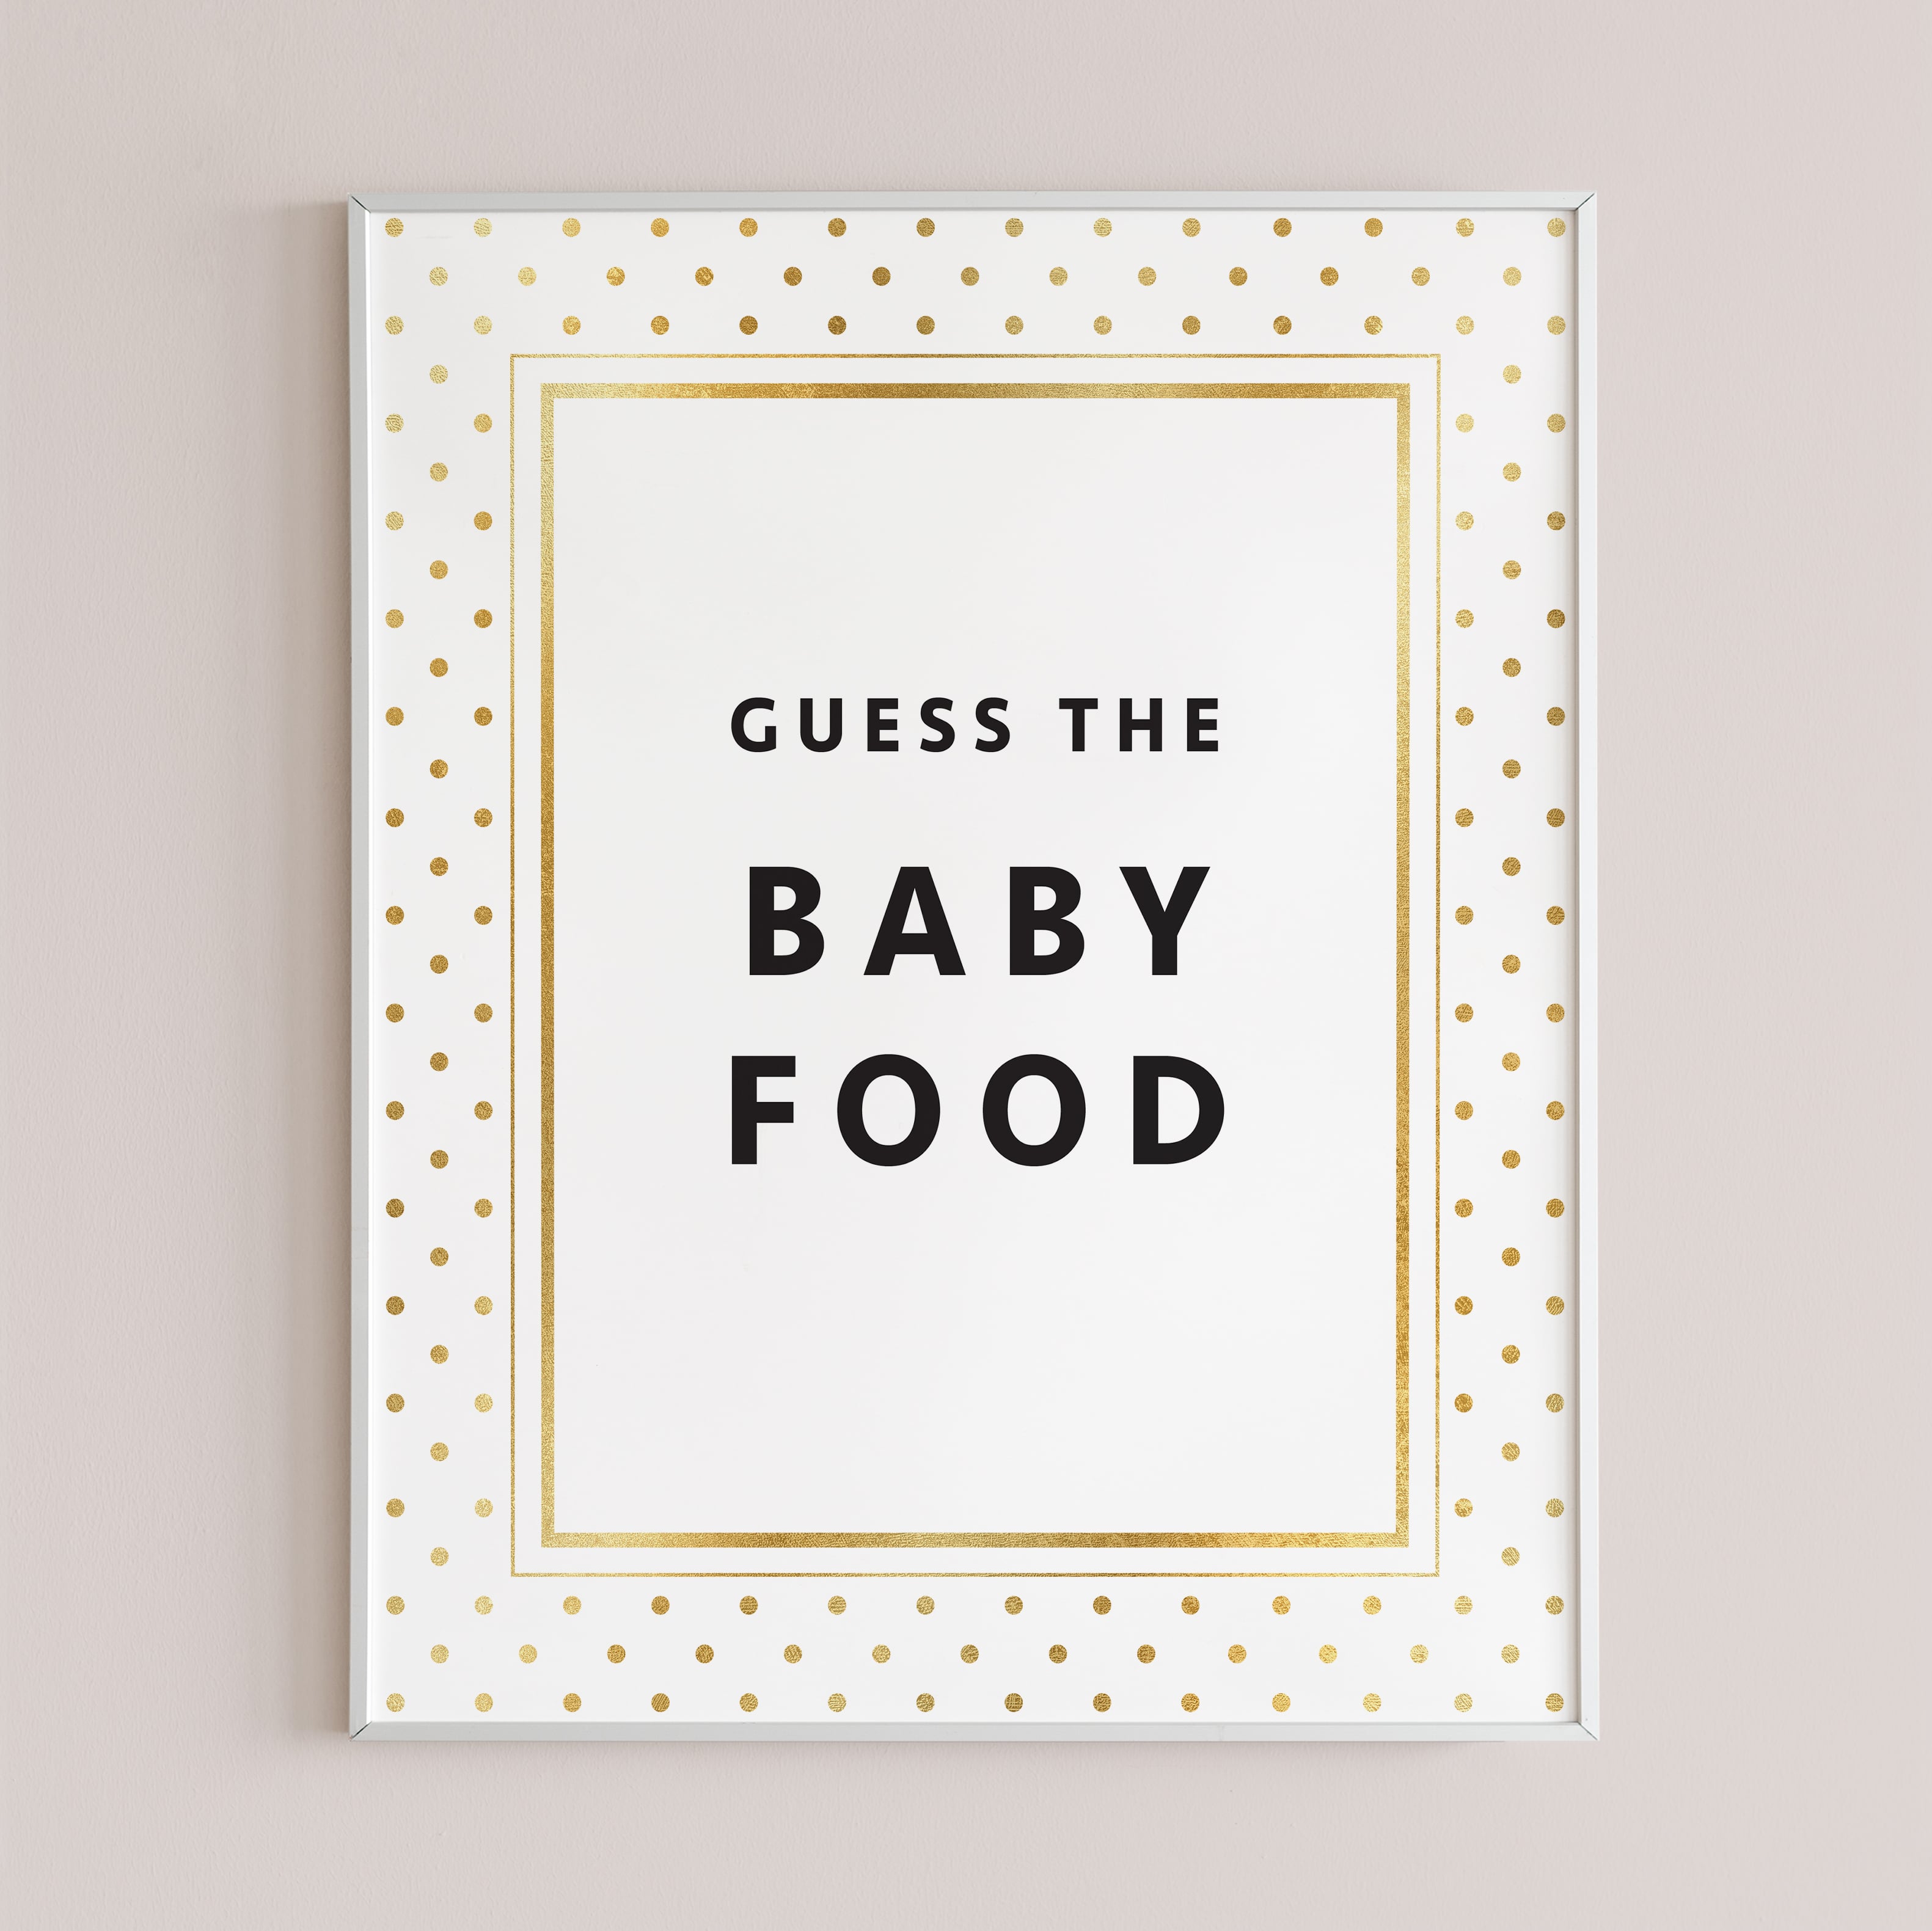 Instant download DIY baby shower activity guess the food flavor by LittleSizzle